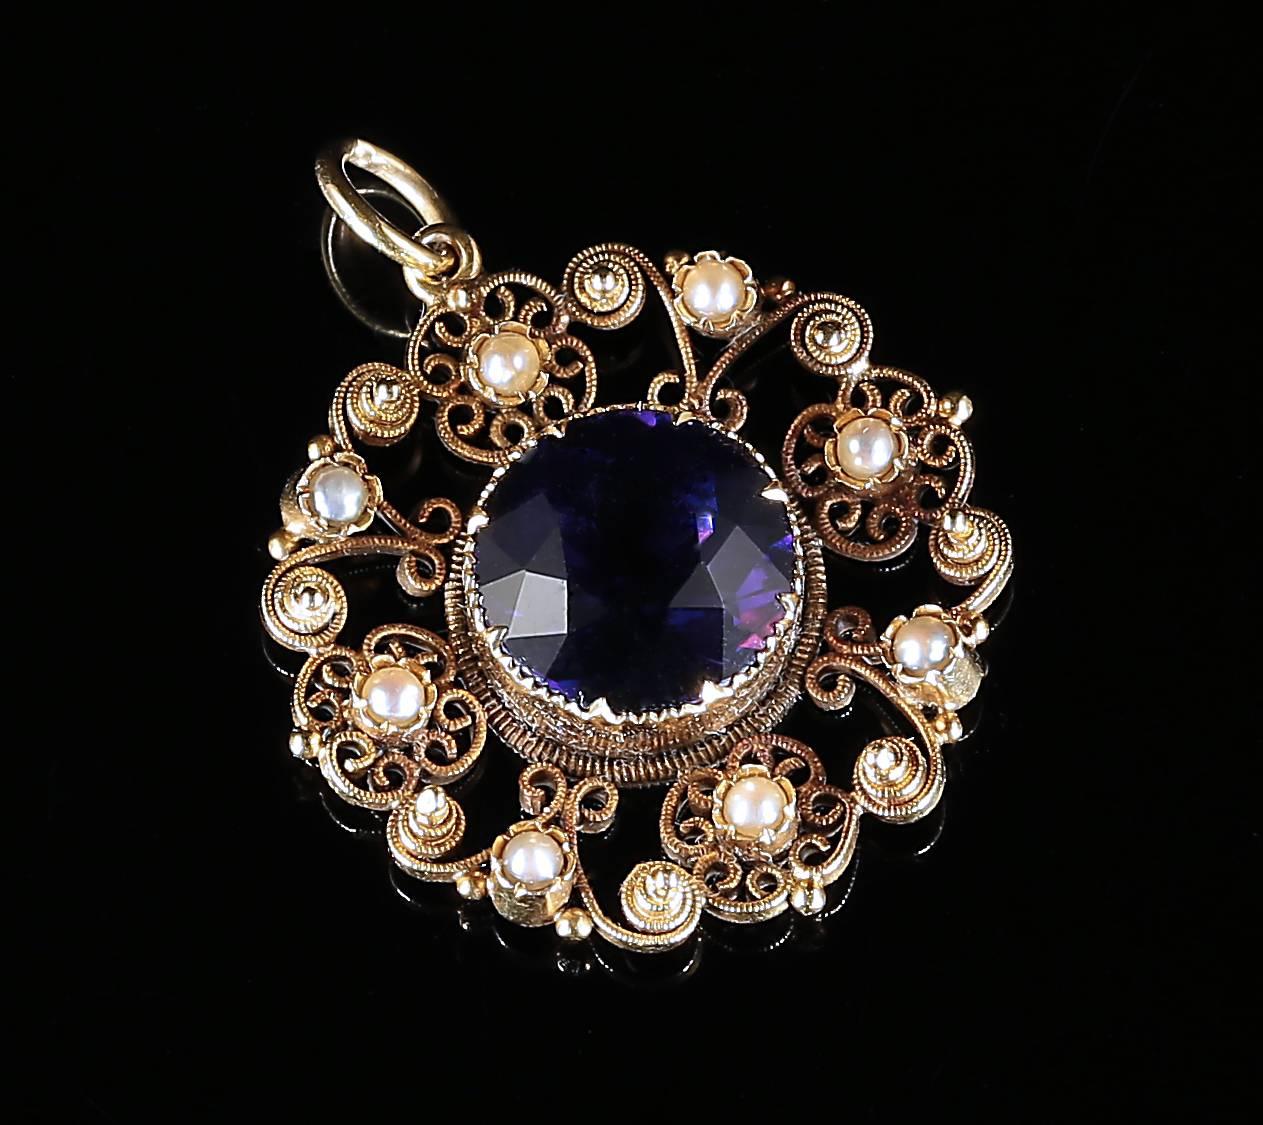 This fabulous 18ct yellow gold genuine Antique Georgian pendant is set with a lovely large Amethyst in the centre and adorned with cannetille workmanship and natural pearls. 

Beautiful all round Georgian detail is set into this fabulous pendant.